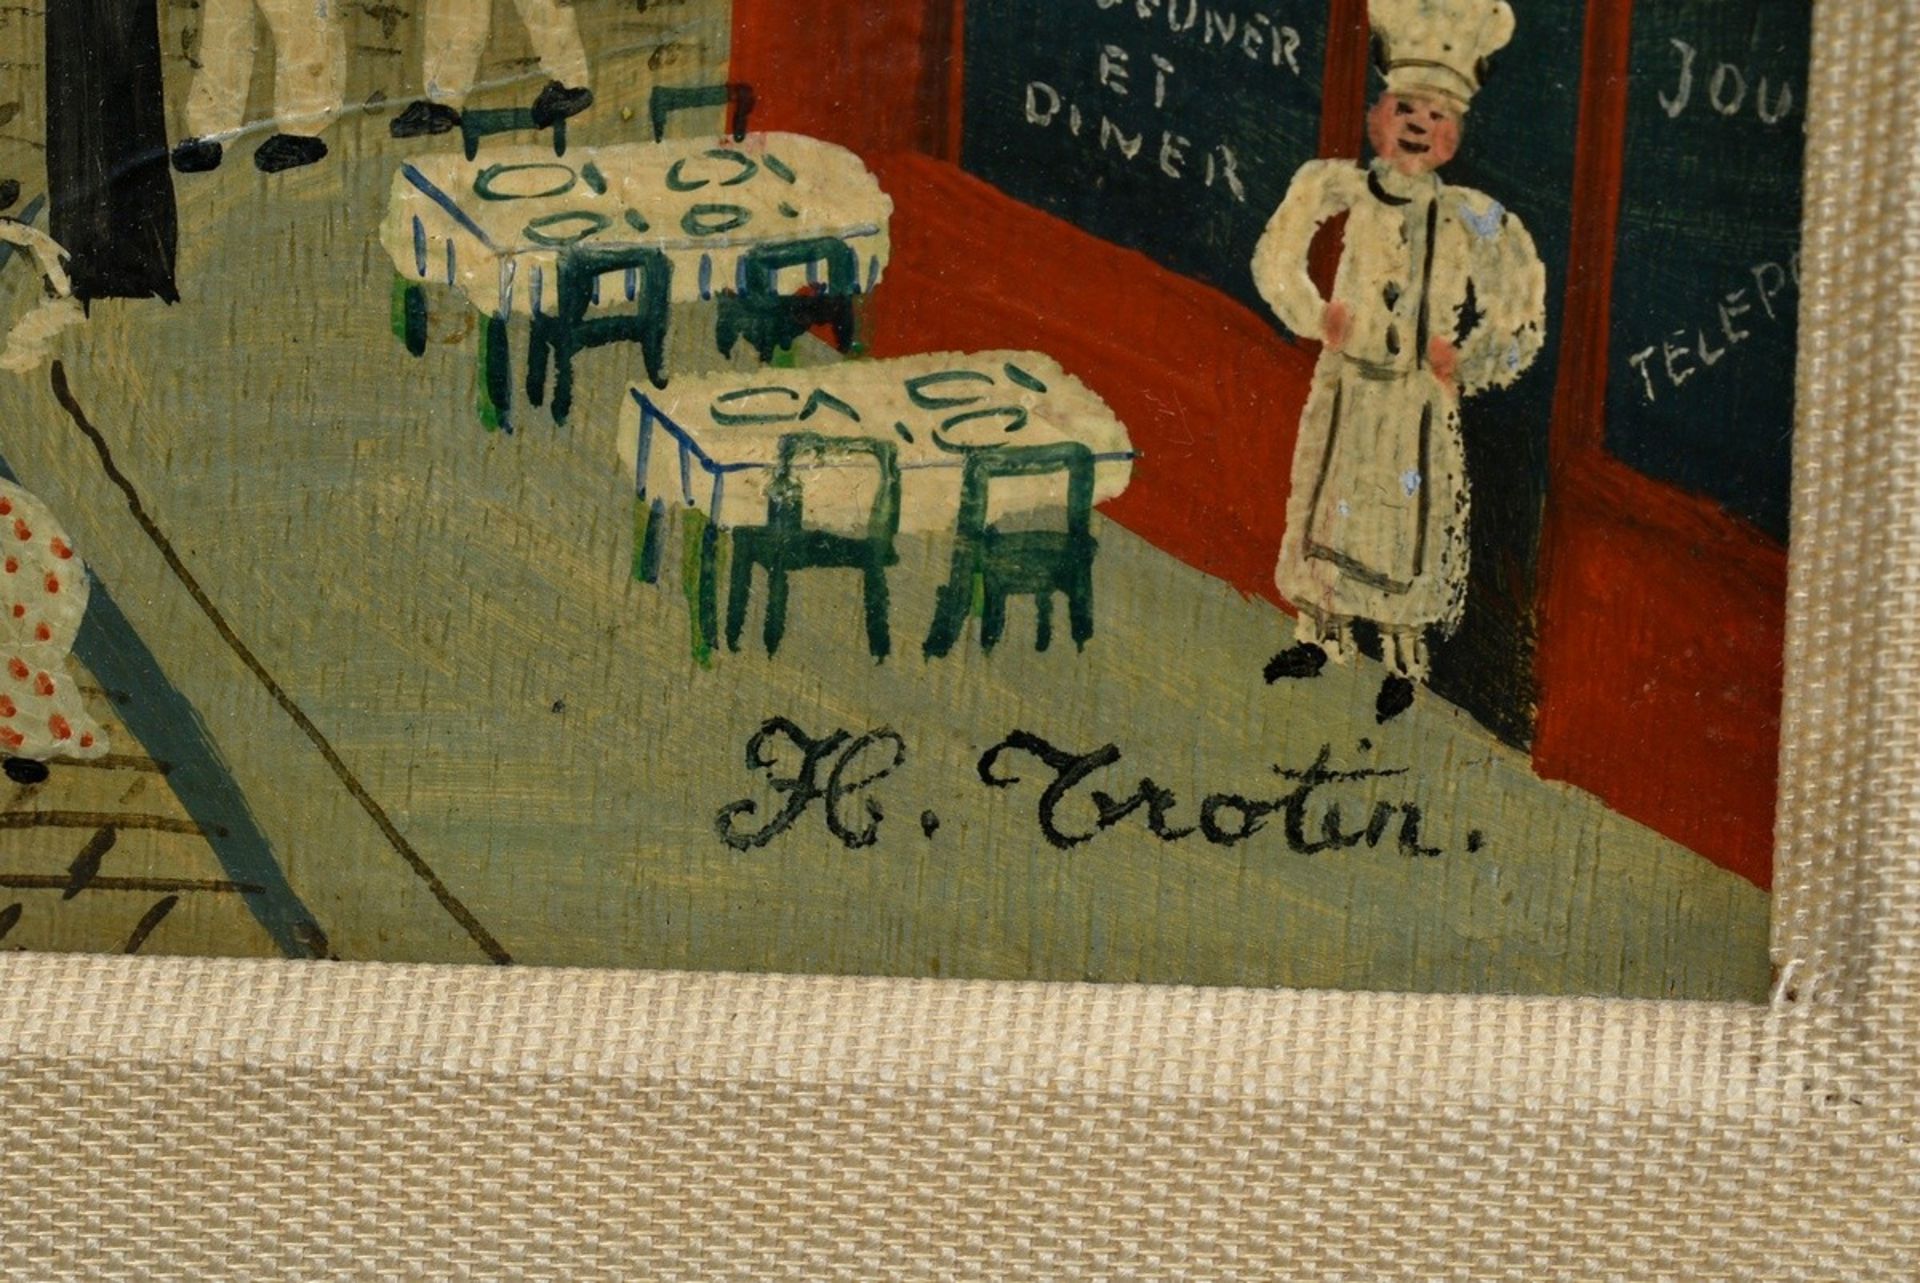 Trotin, Hector (1894-1966) "Balloon over Paris", oil/wood, b.r. sign., verso adhesive label "Kunsth - Image 3 of 5